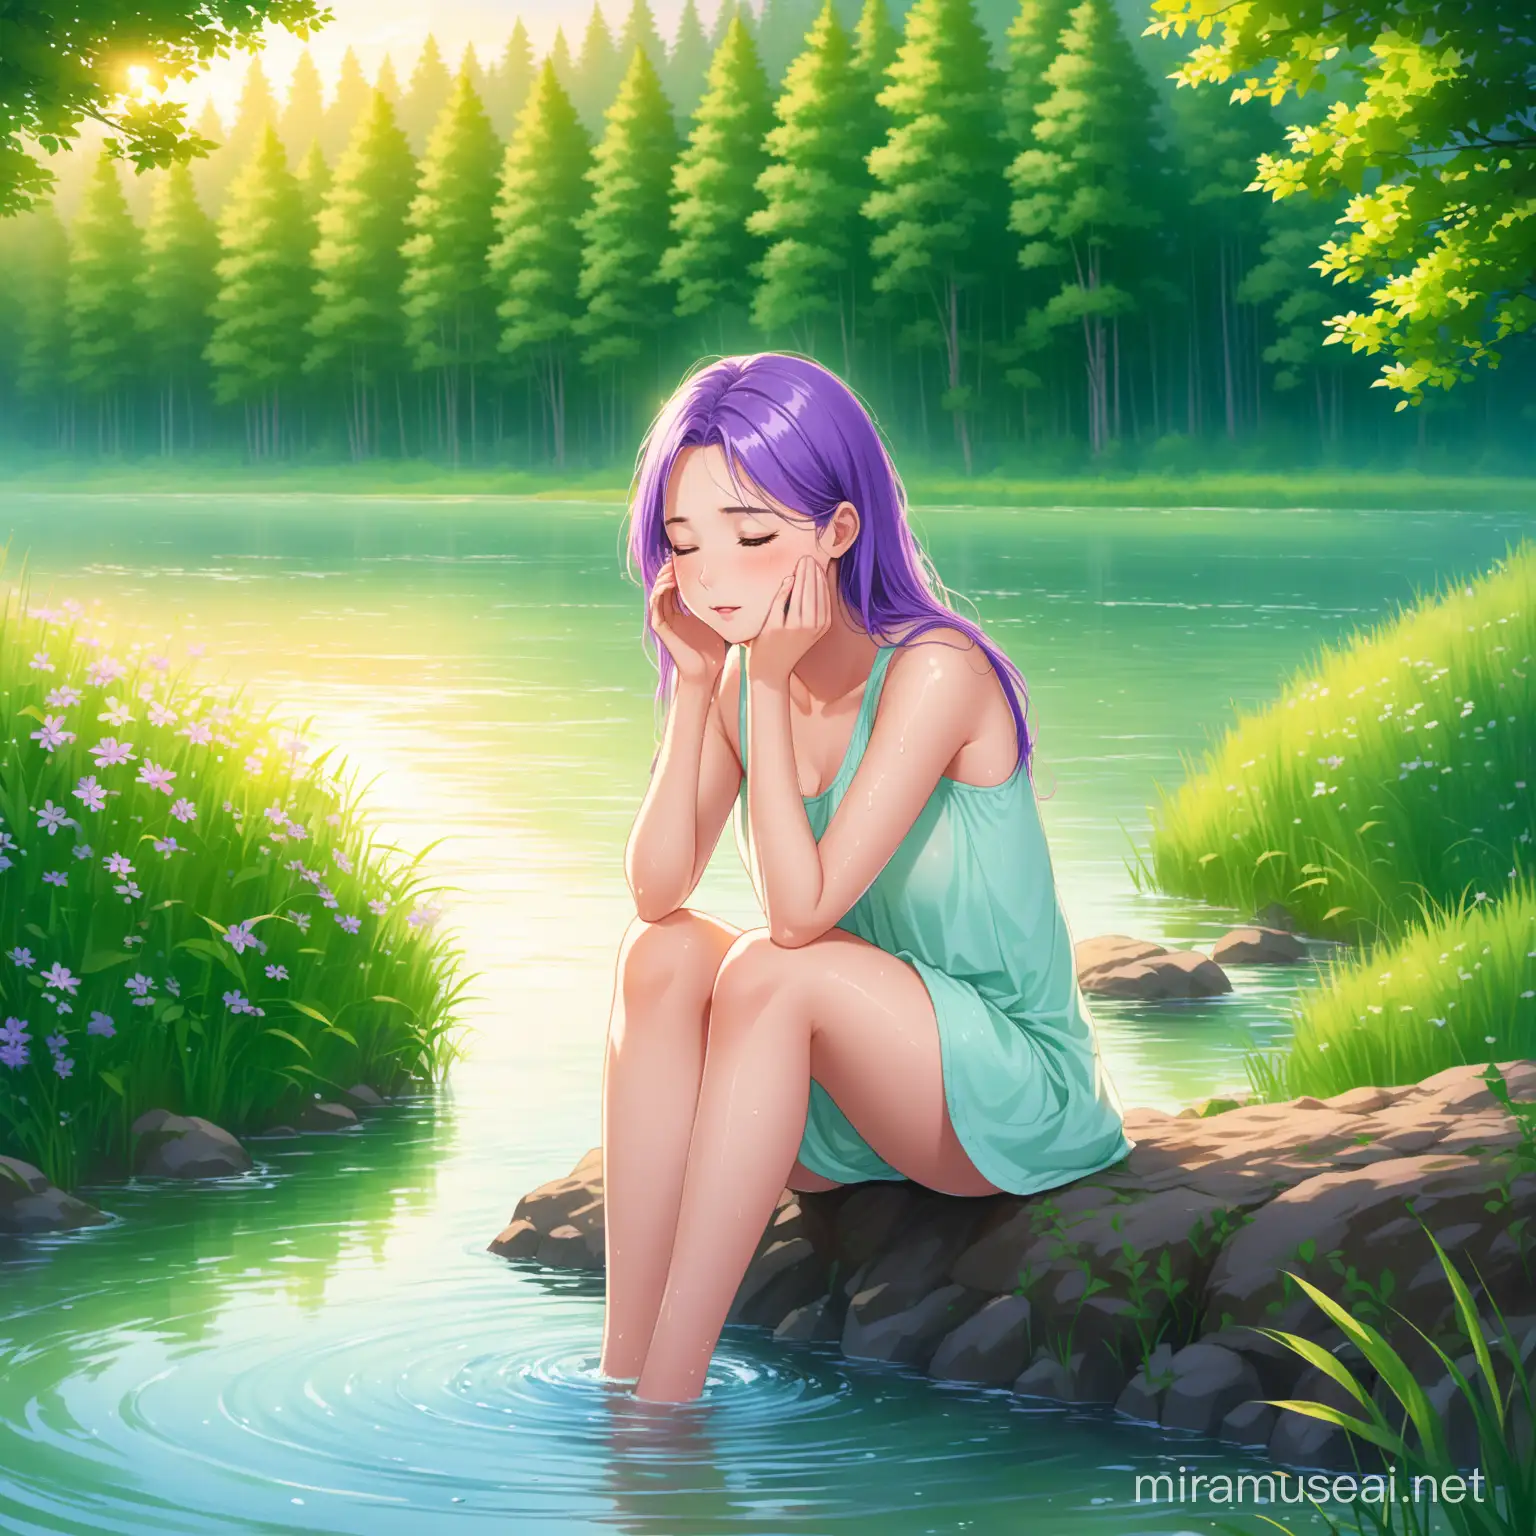 very sleep-deprived beautiful girl with purple hair sitting on the river bank and washing her face in the river, very early morning, in the background is a spring green beautiful forest